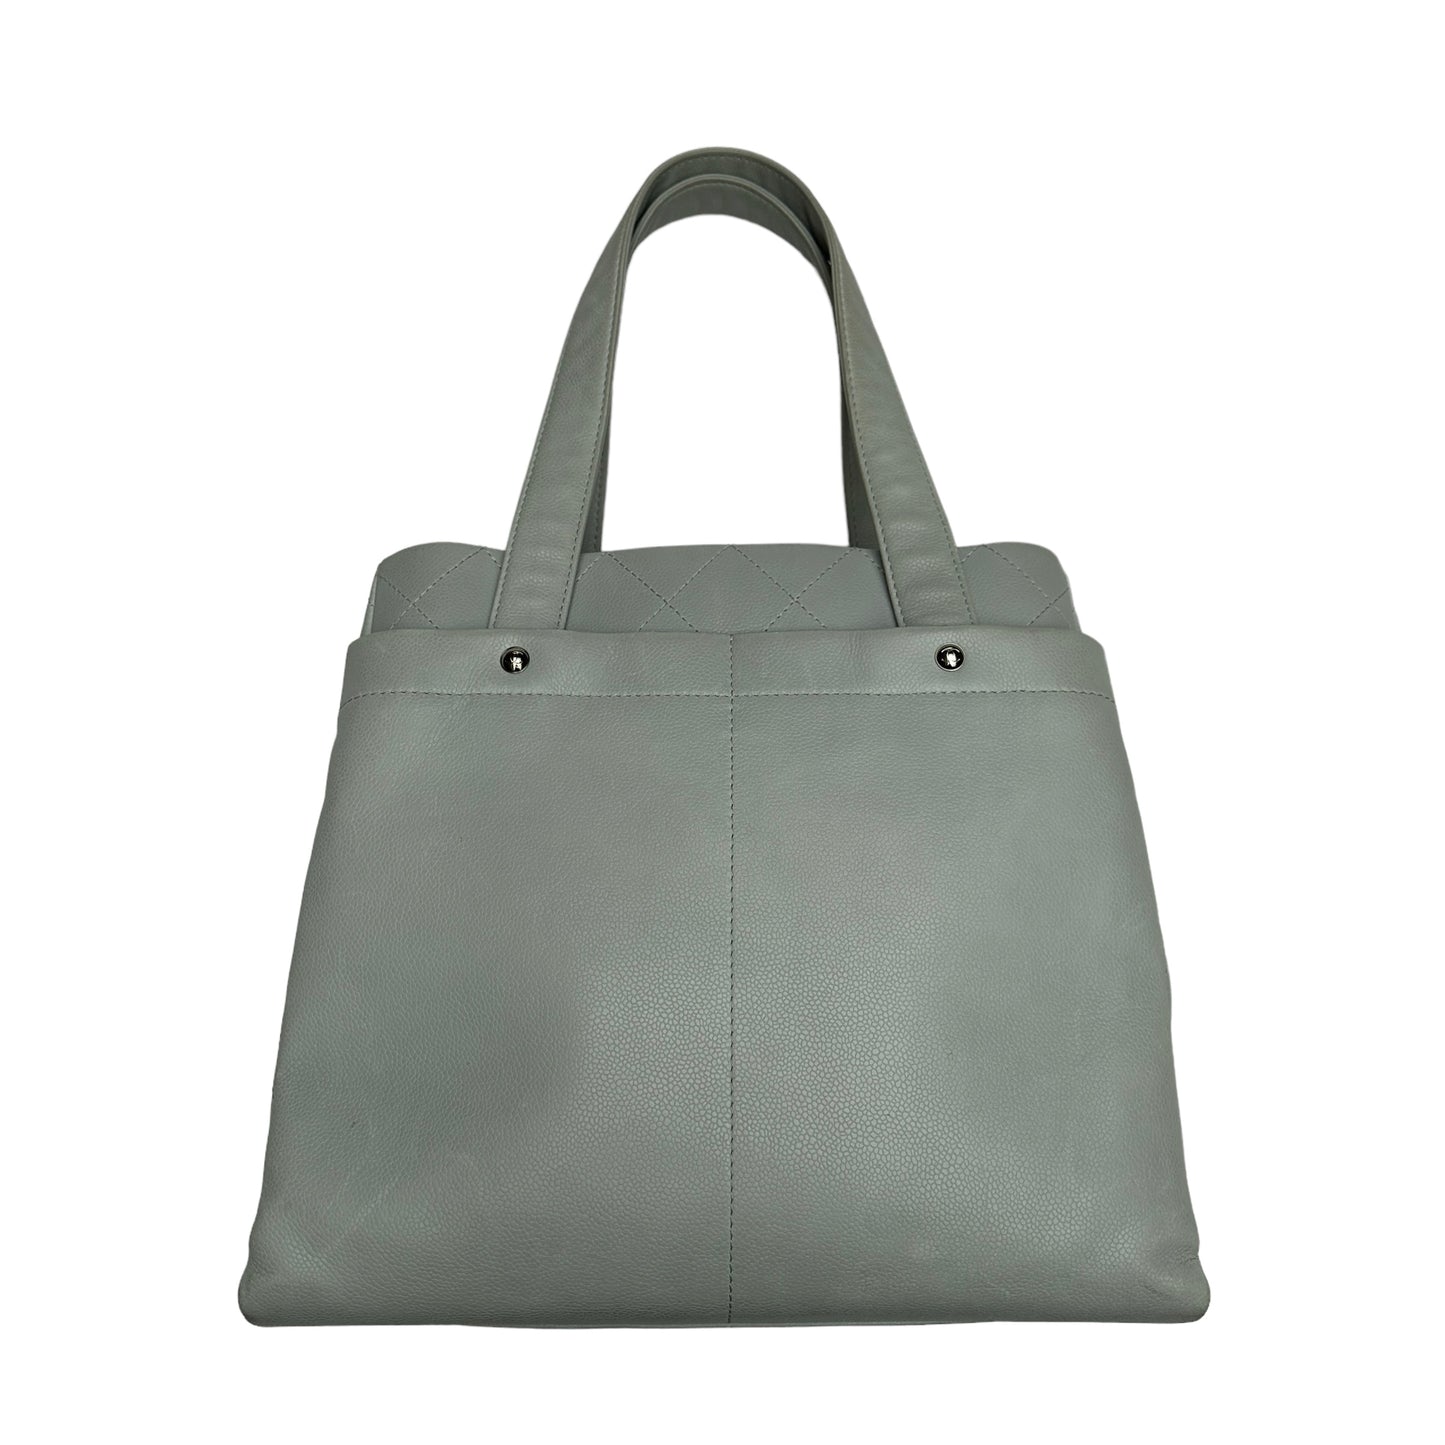 CC Grey Leather Tote